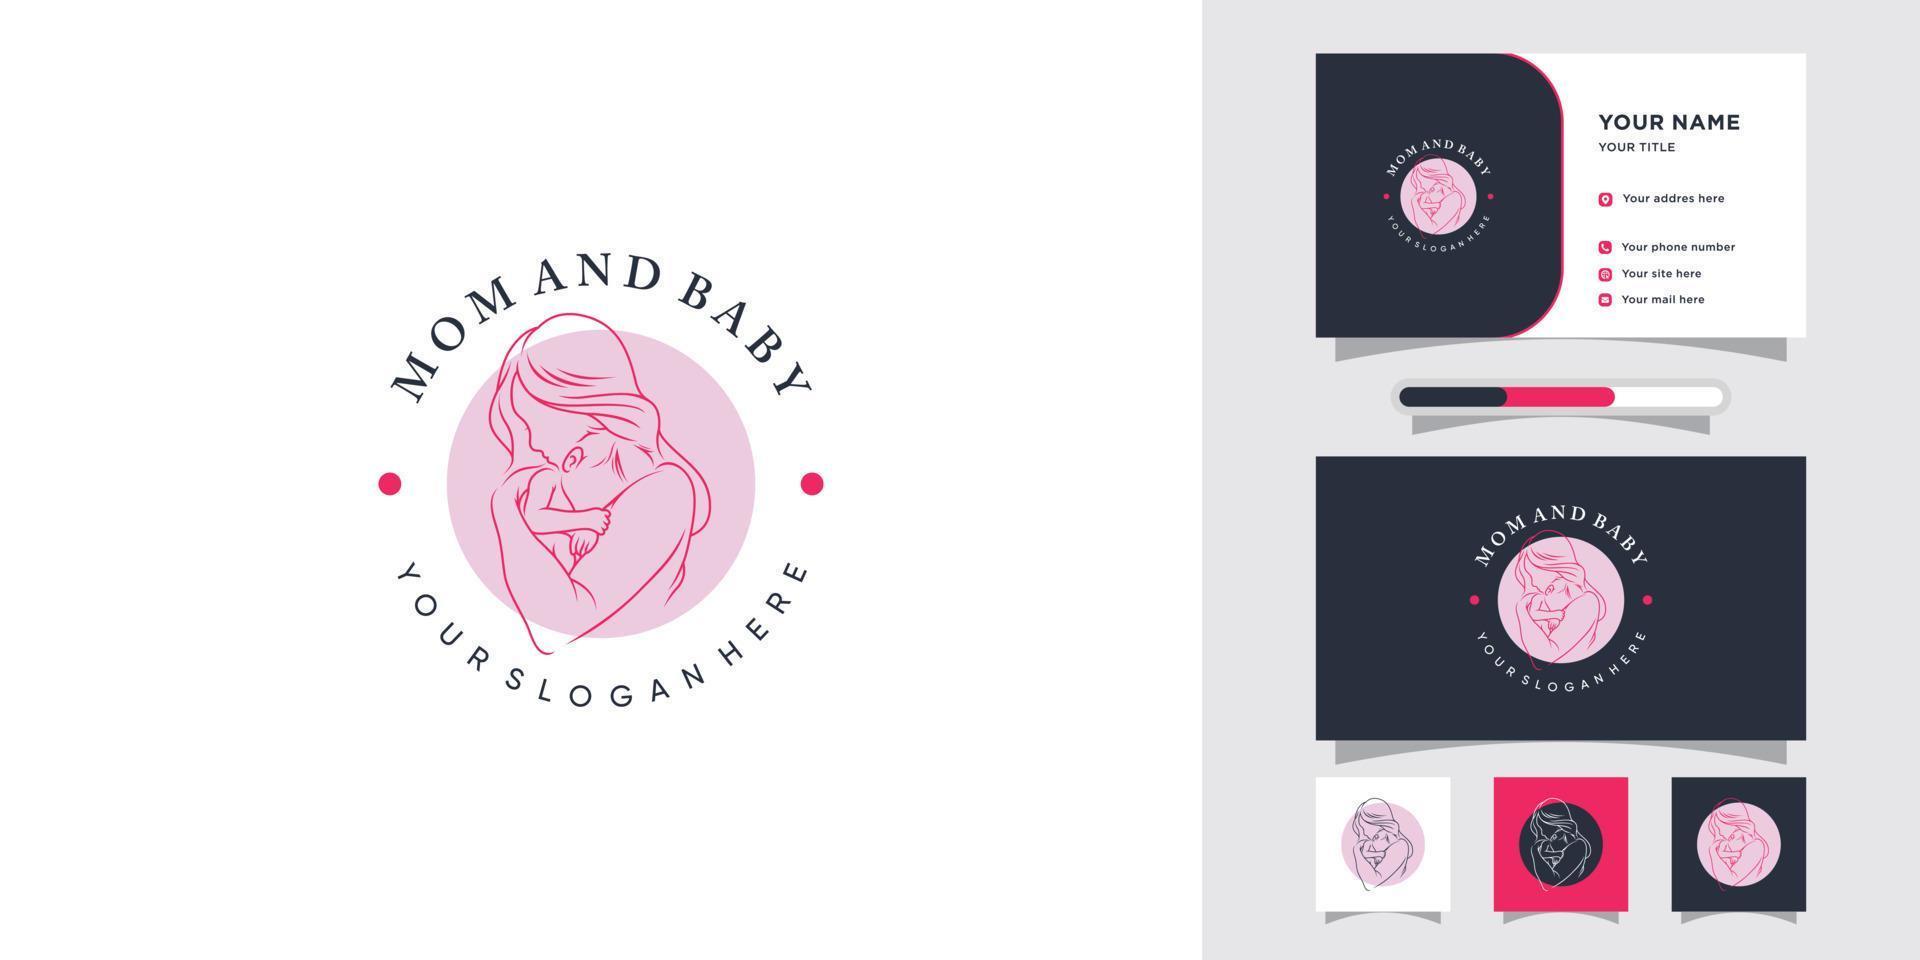 Mom and baby logo design with negative space concept and business card template Premium Vector